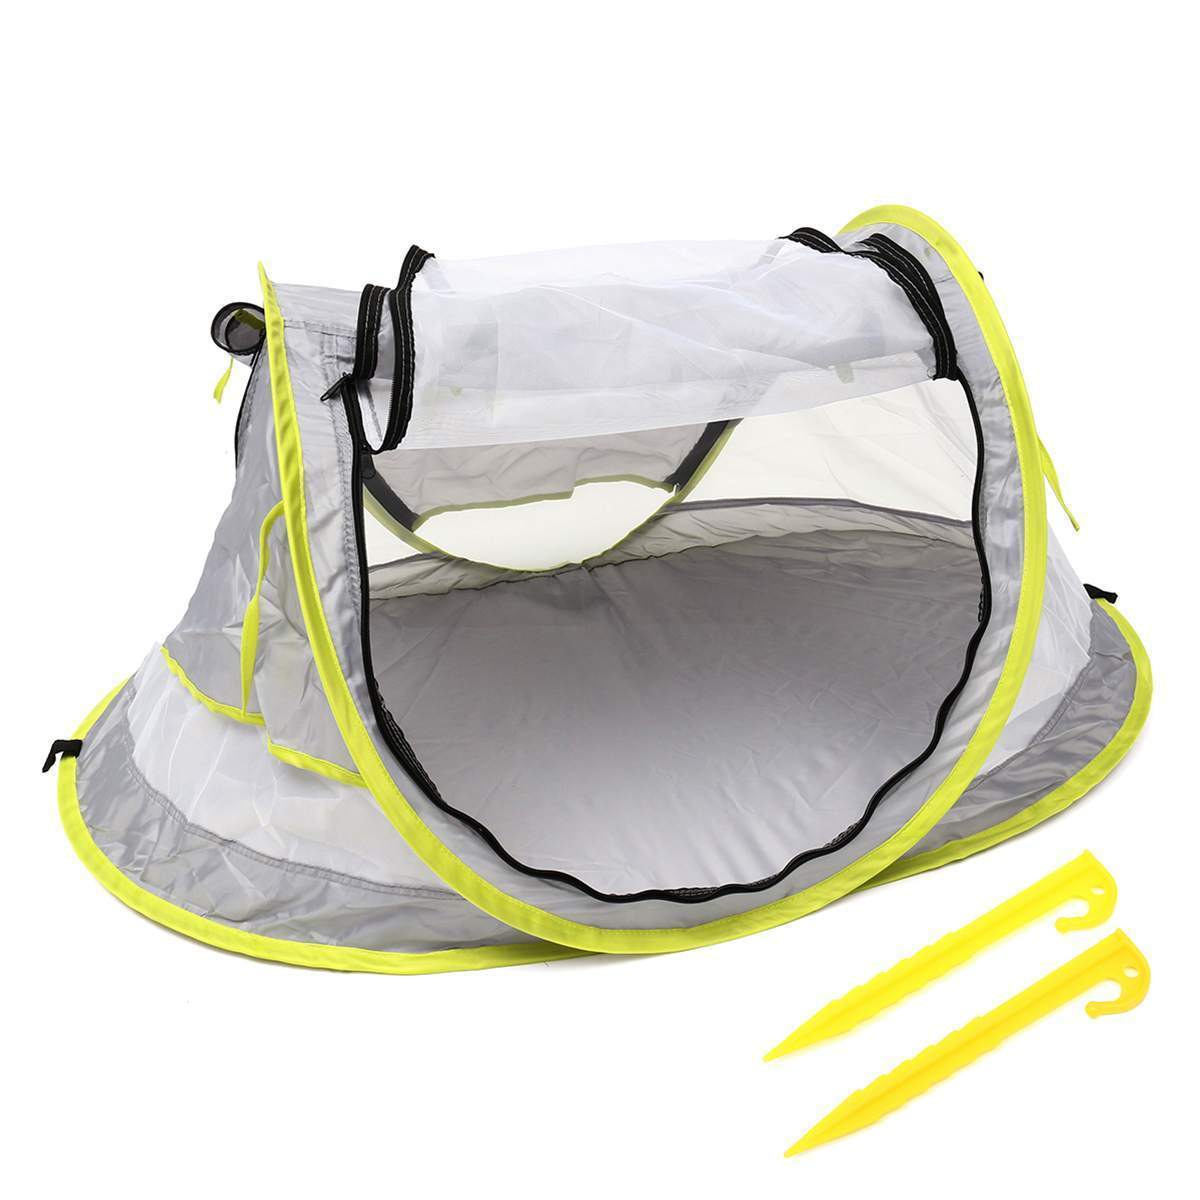 Portable Baby Mosquito net Pop Up Tent for Insects Outdoors